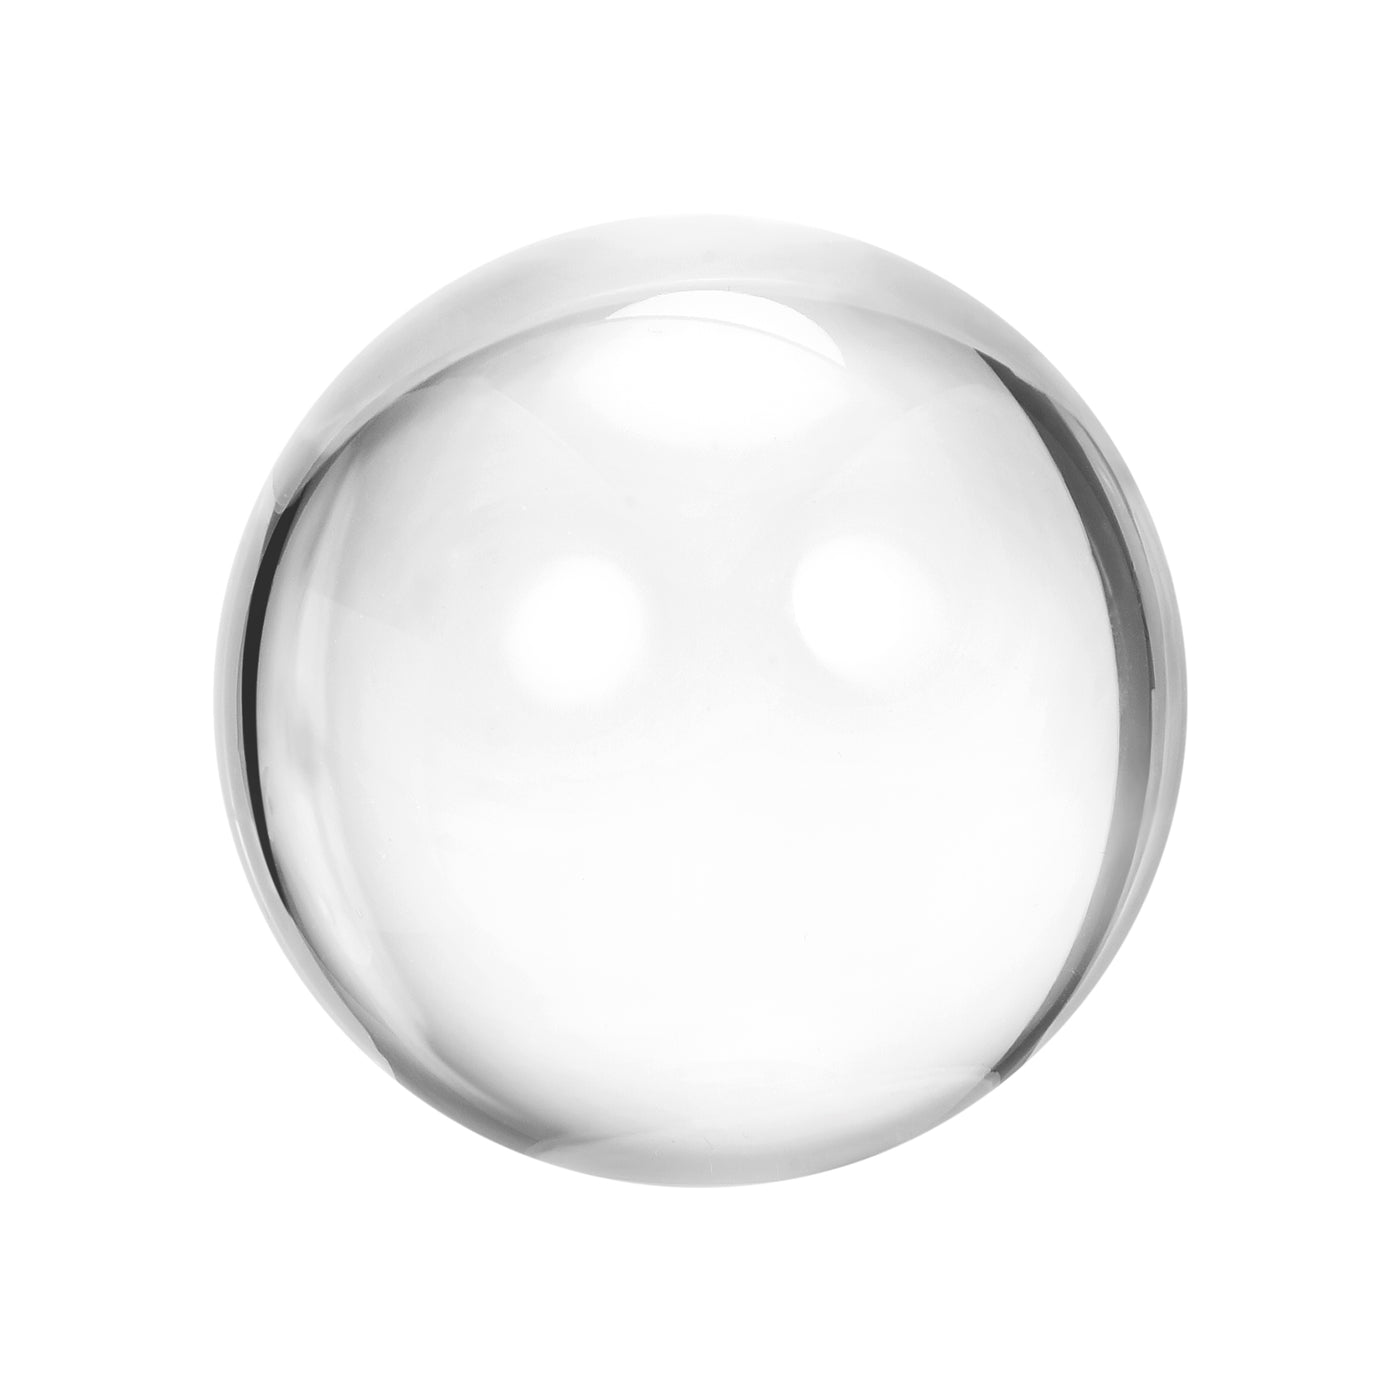 Uxcell Uxcell Clear Acrylic Contact Juggling Ball 3-1/8"- 80mm, with 120x140mm Ball Bag